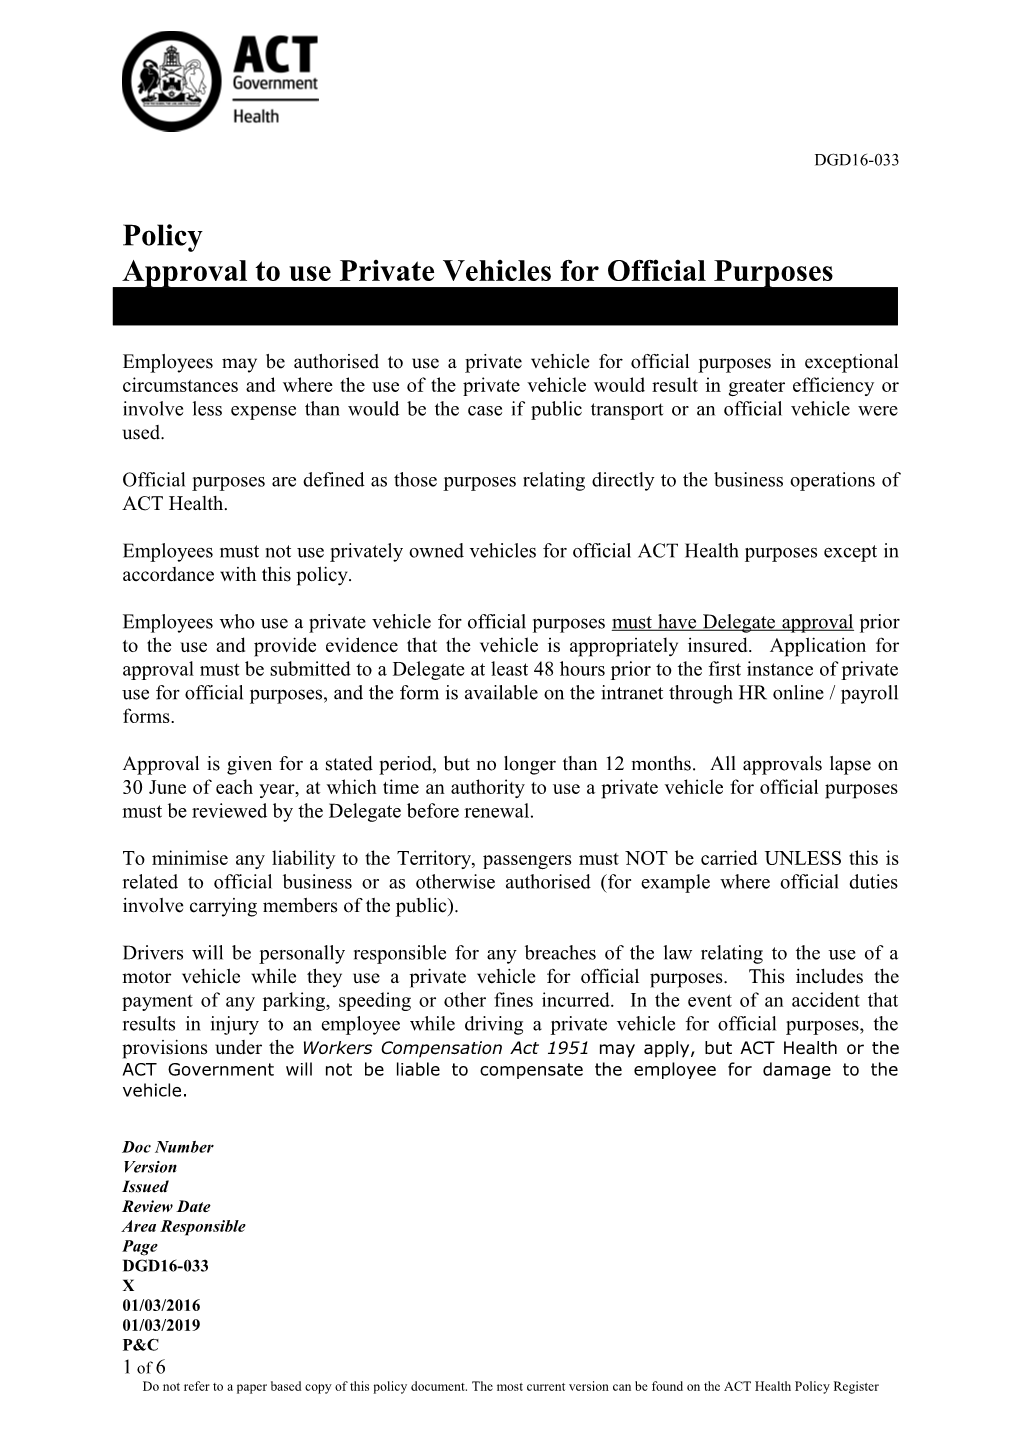 Approval to Use Private Vehicles for Official Purposes Policy